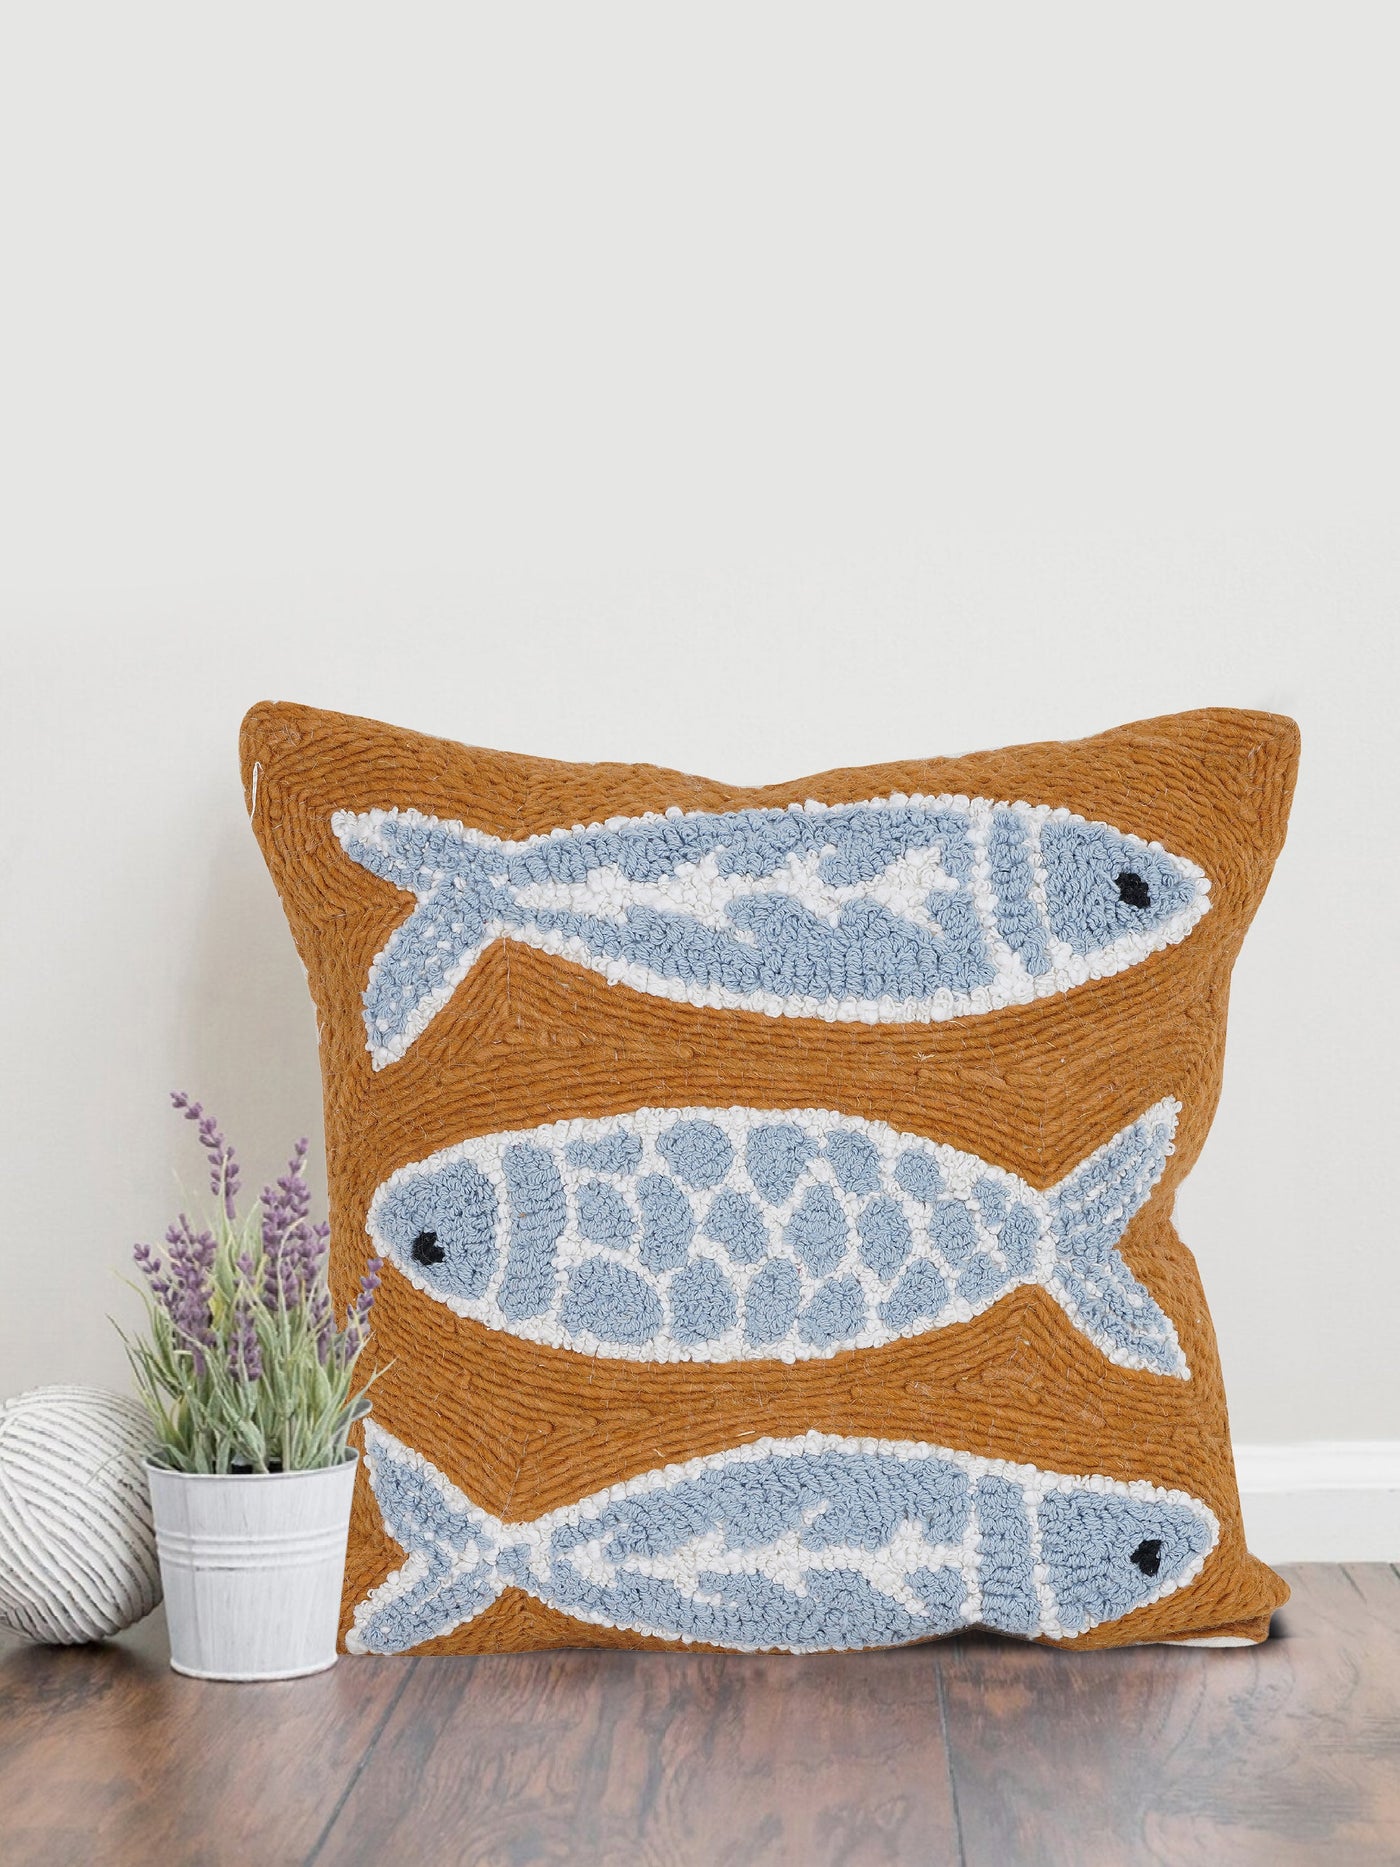 Blue Fish Embroidered Cushion